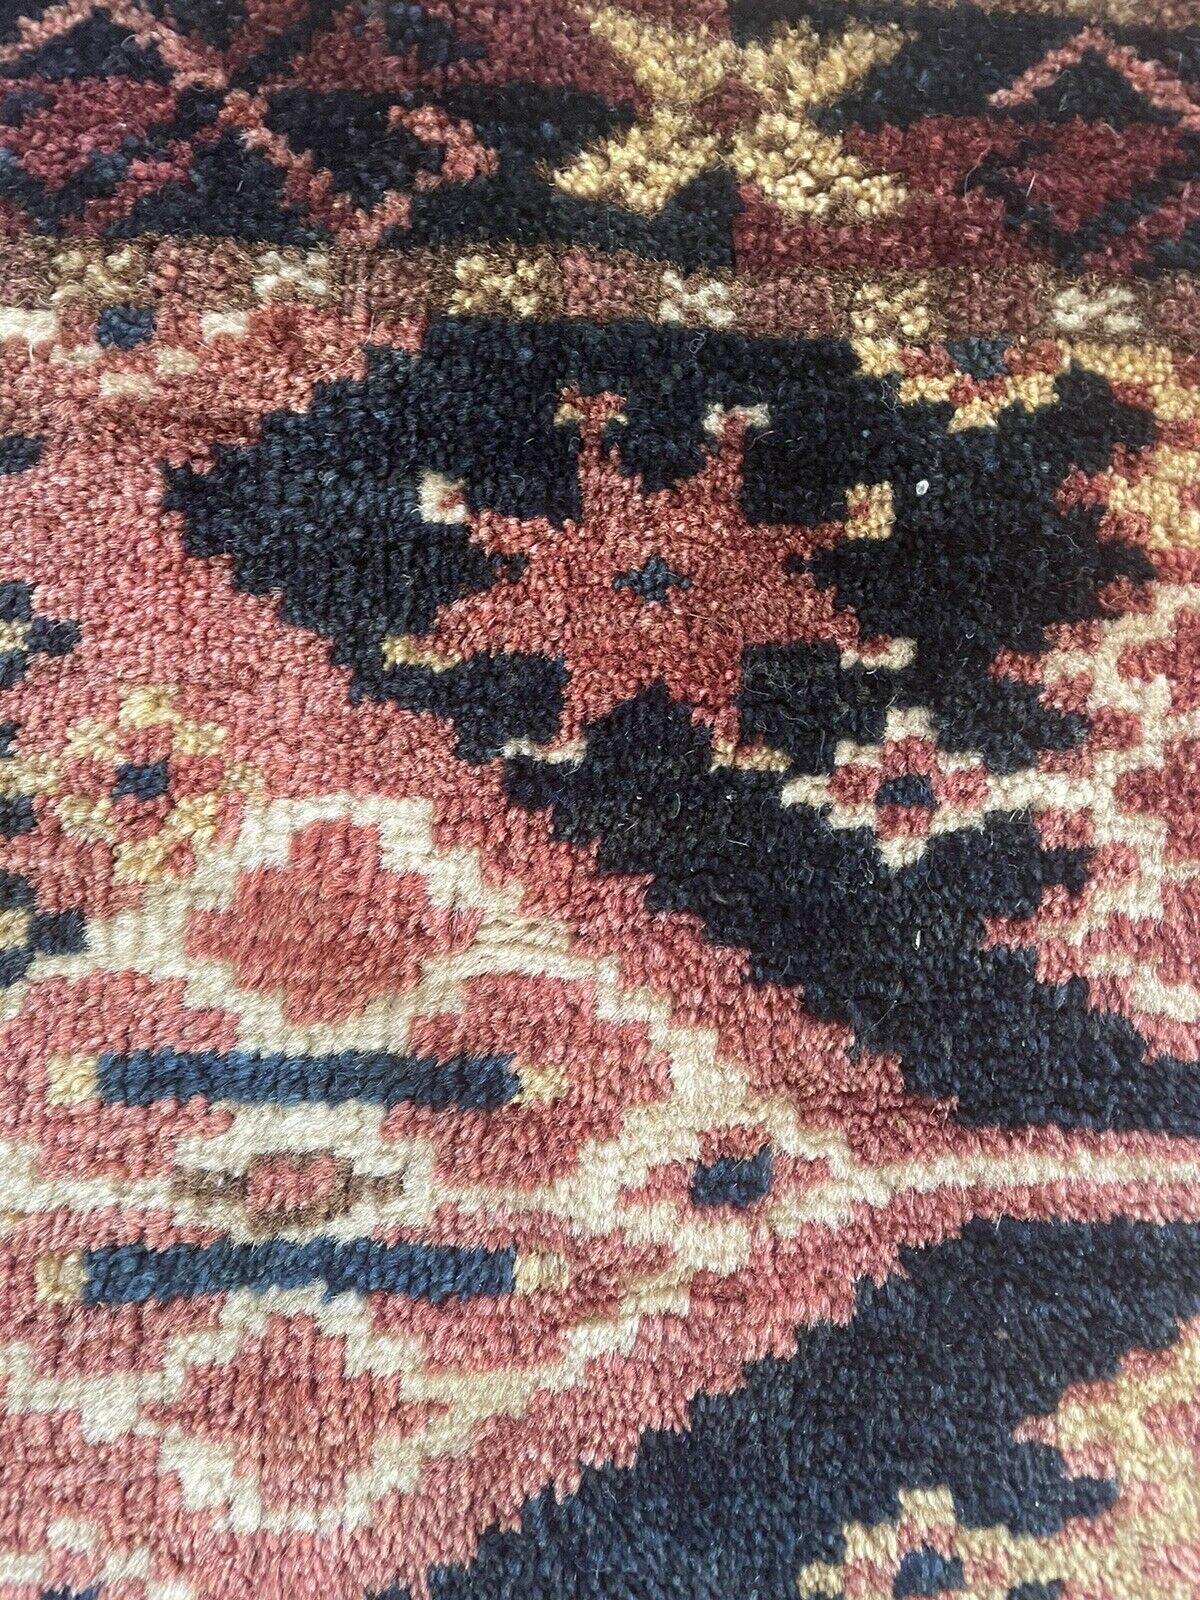 Close-up of age wear on Handmade Antique Afghan Beshir Collectible Chuval Rug - Detailed view showing signs of age wear, which add to the rug's authenticity and character, while also highlighting its resilience.